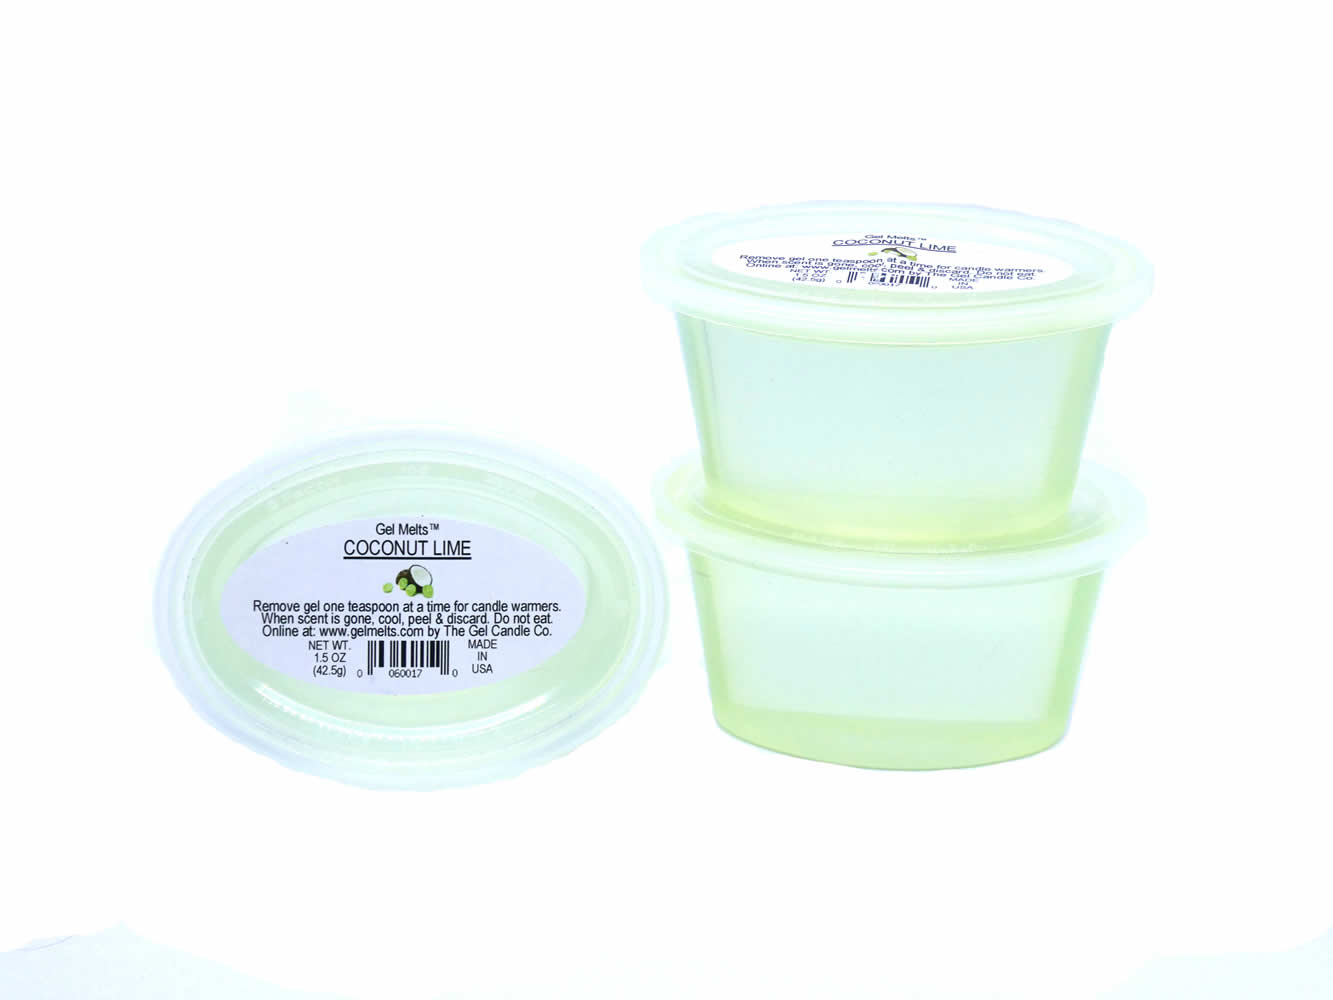 Coconut Lime scented Gel Melts™ Gel Wax for warmers - 3 pack - Click Image to Close